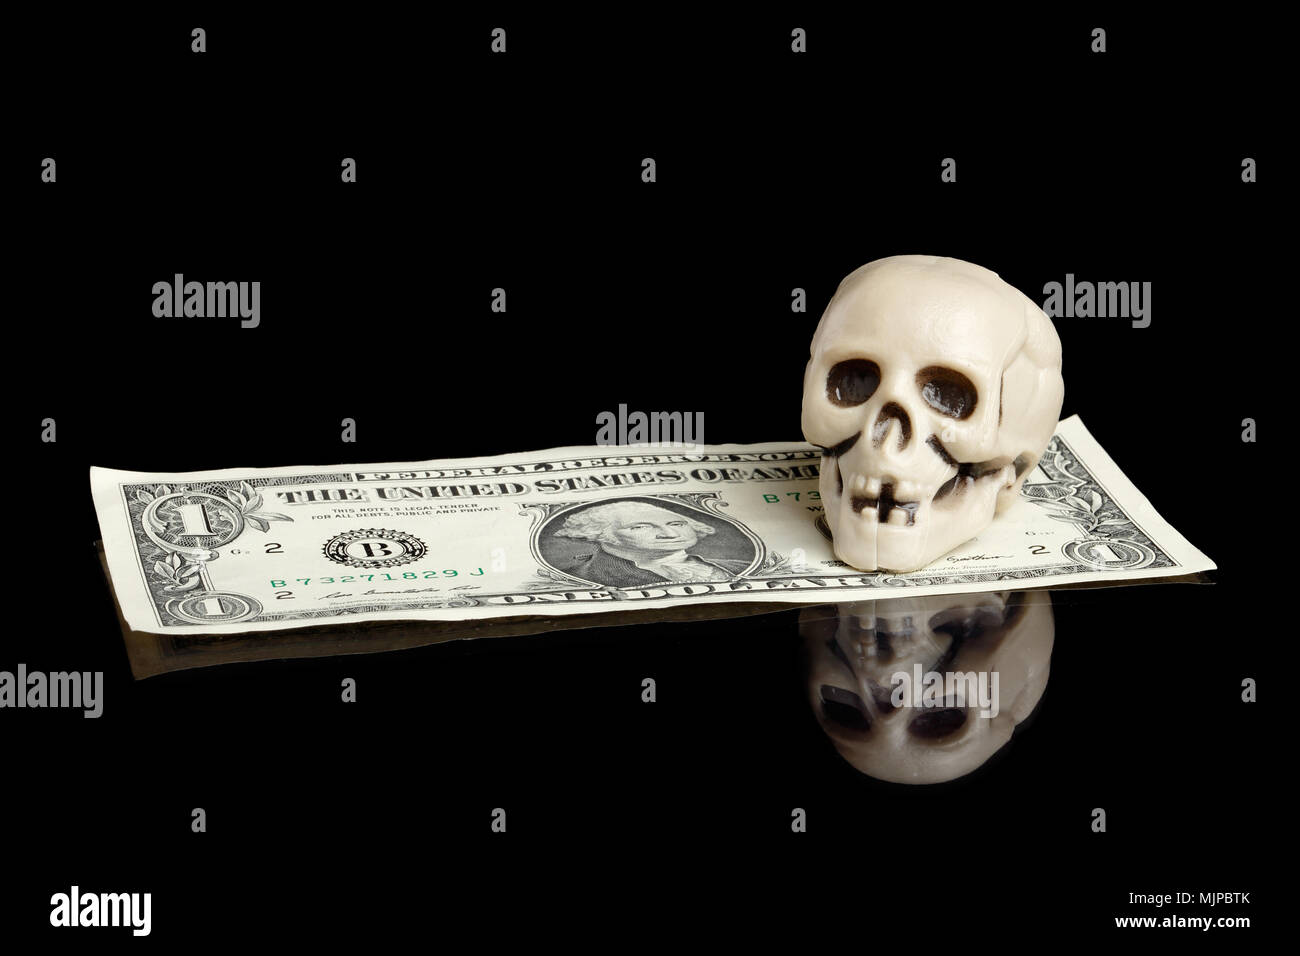 A small plastic skull on a US dollar banknote isolated on black. Stock Photo